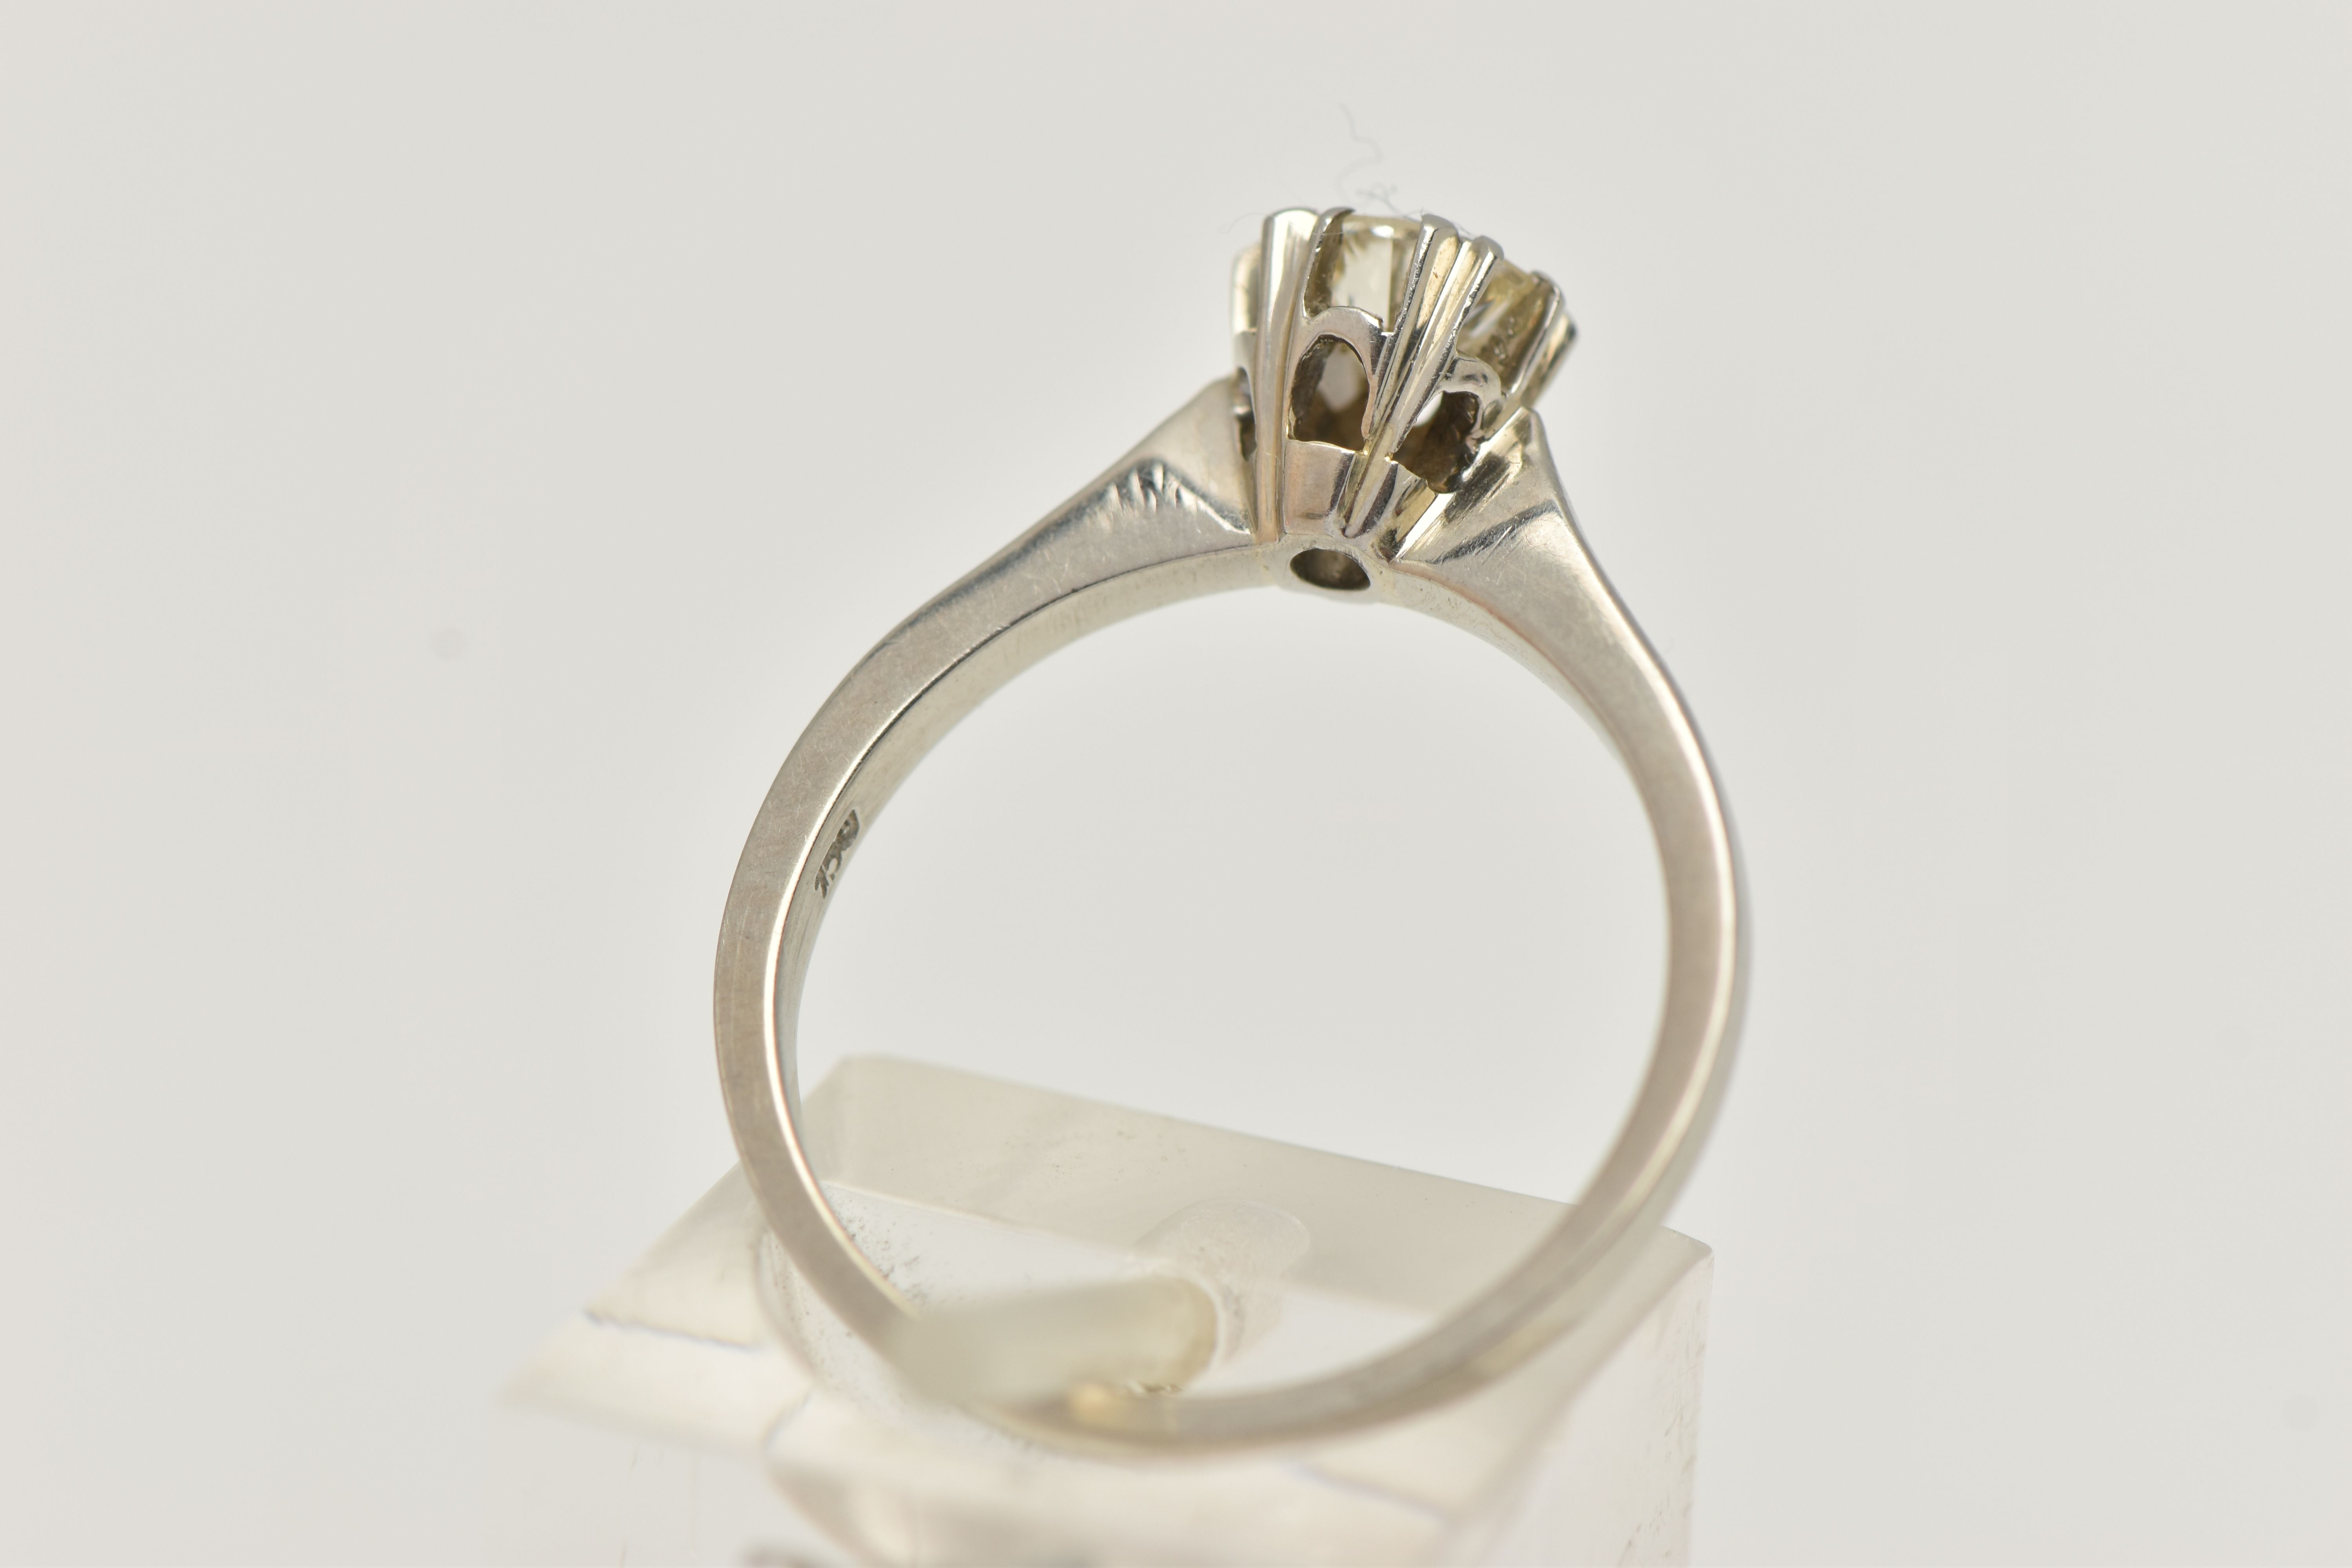 A DIAMOND SINGLE STONE RING, set with a transition cut diamond, measuring approximately 5.30 x 5. - Image 3 of 4